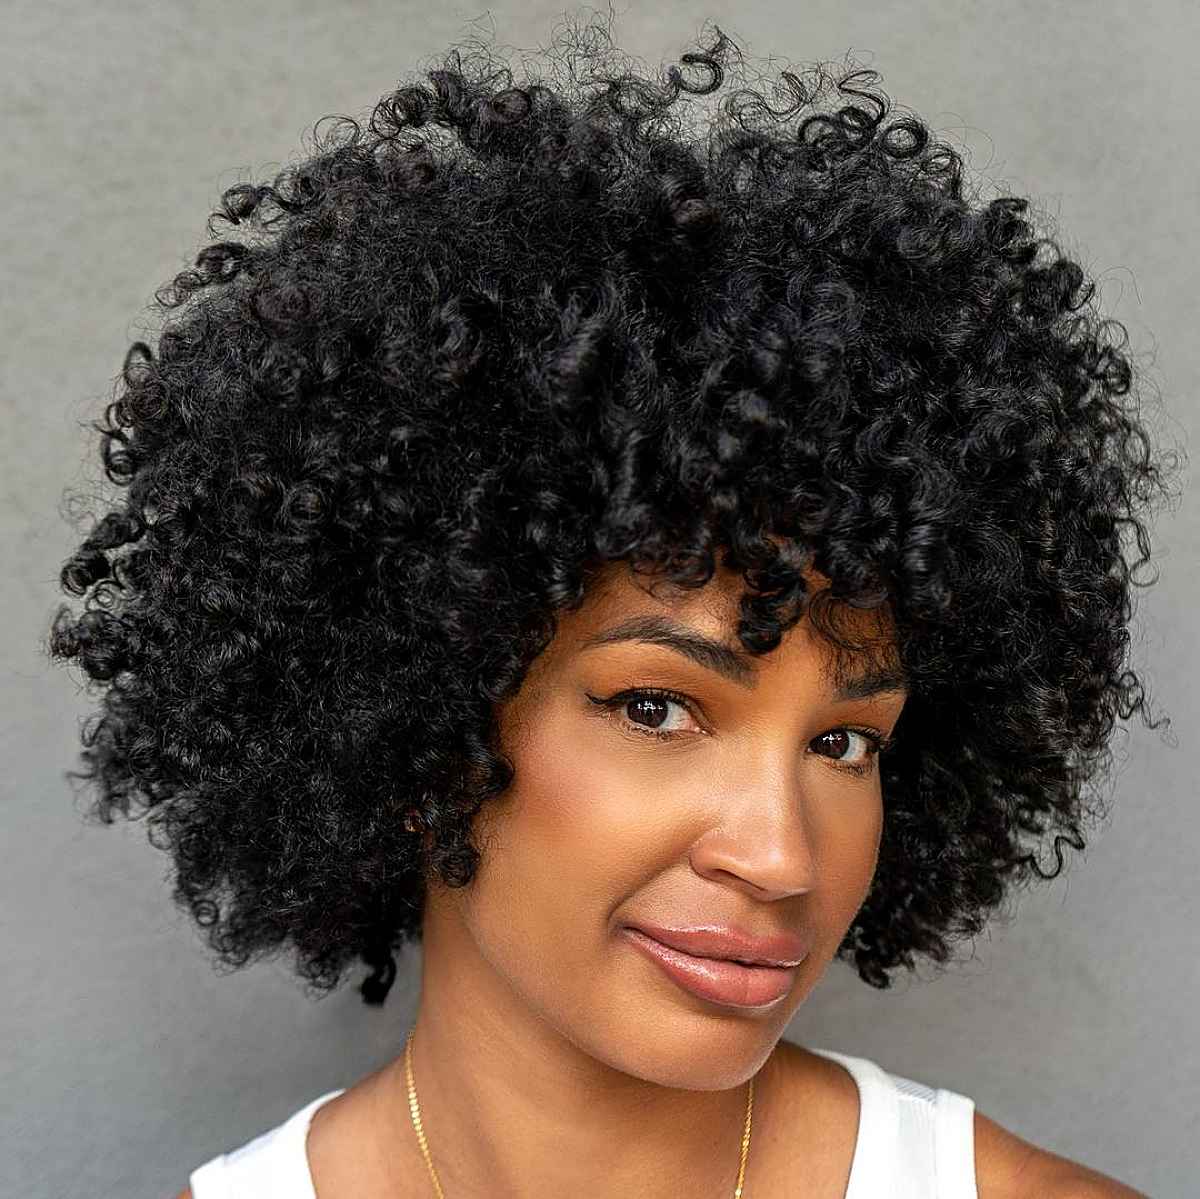 Short Bob for Thick, Curly Hair